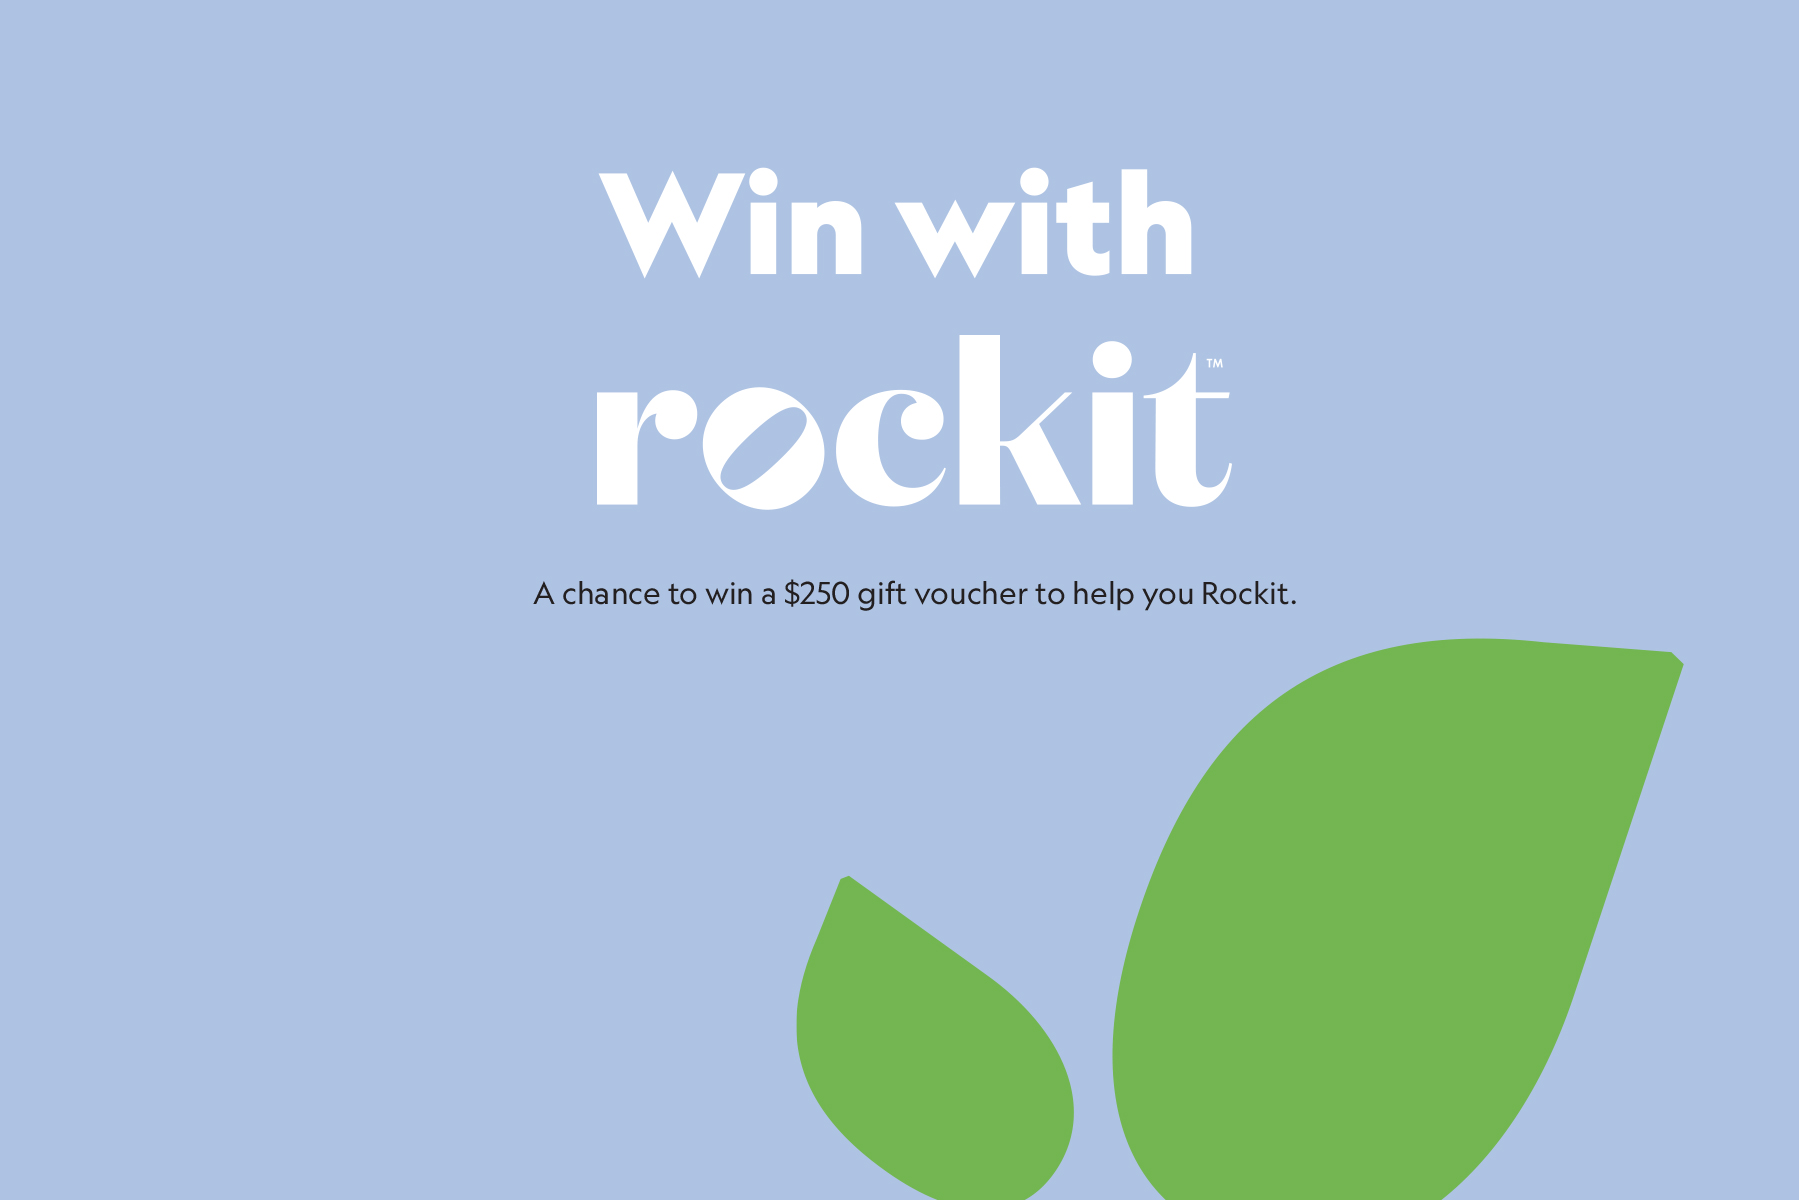 A chance to win a $250 gift voucher to help you Rockit.